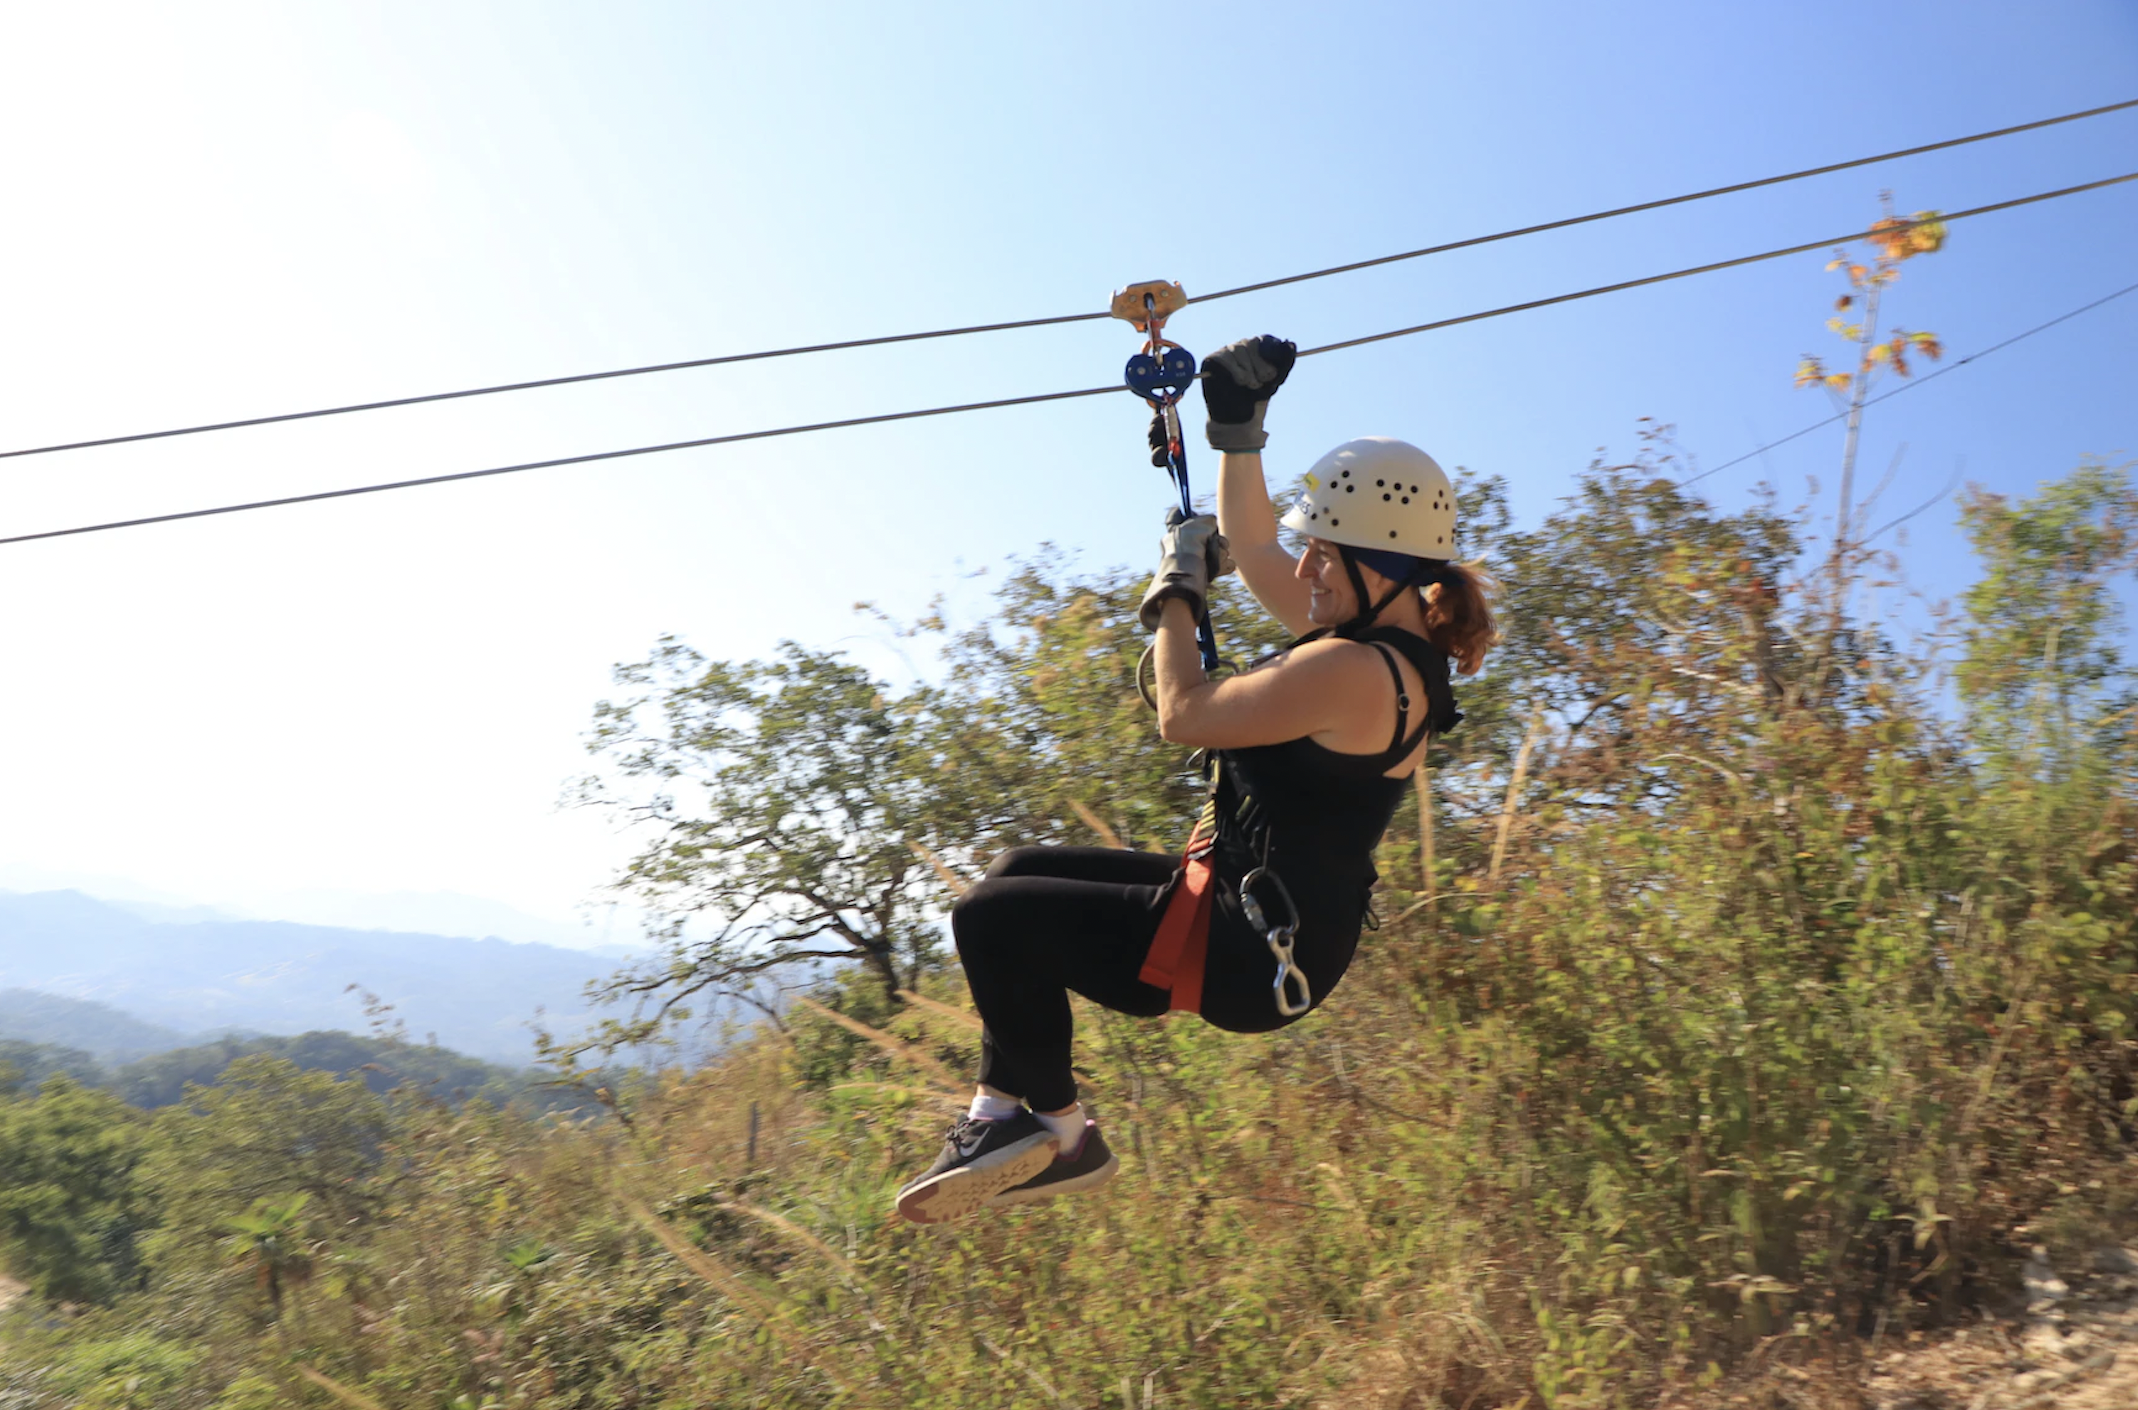 A person on a zipline.